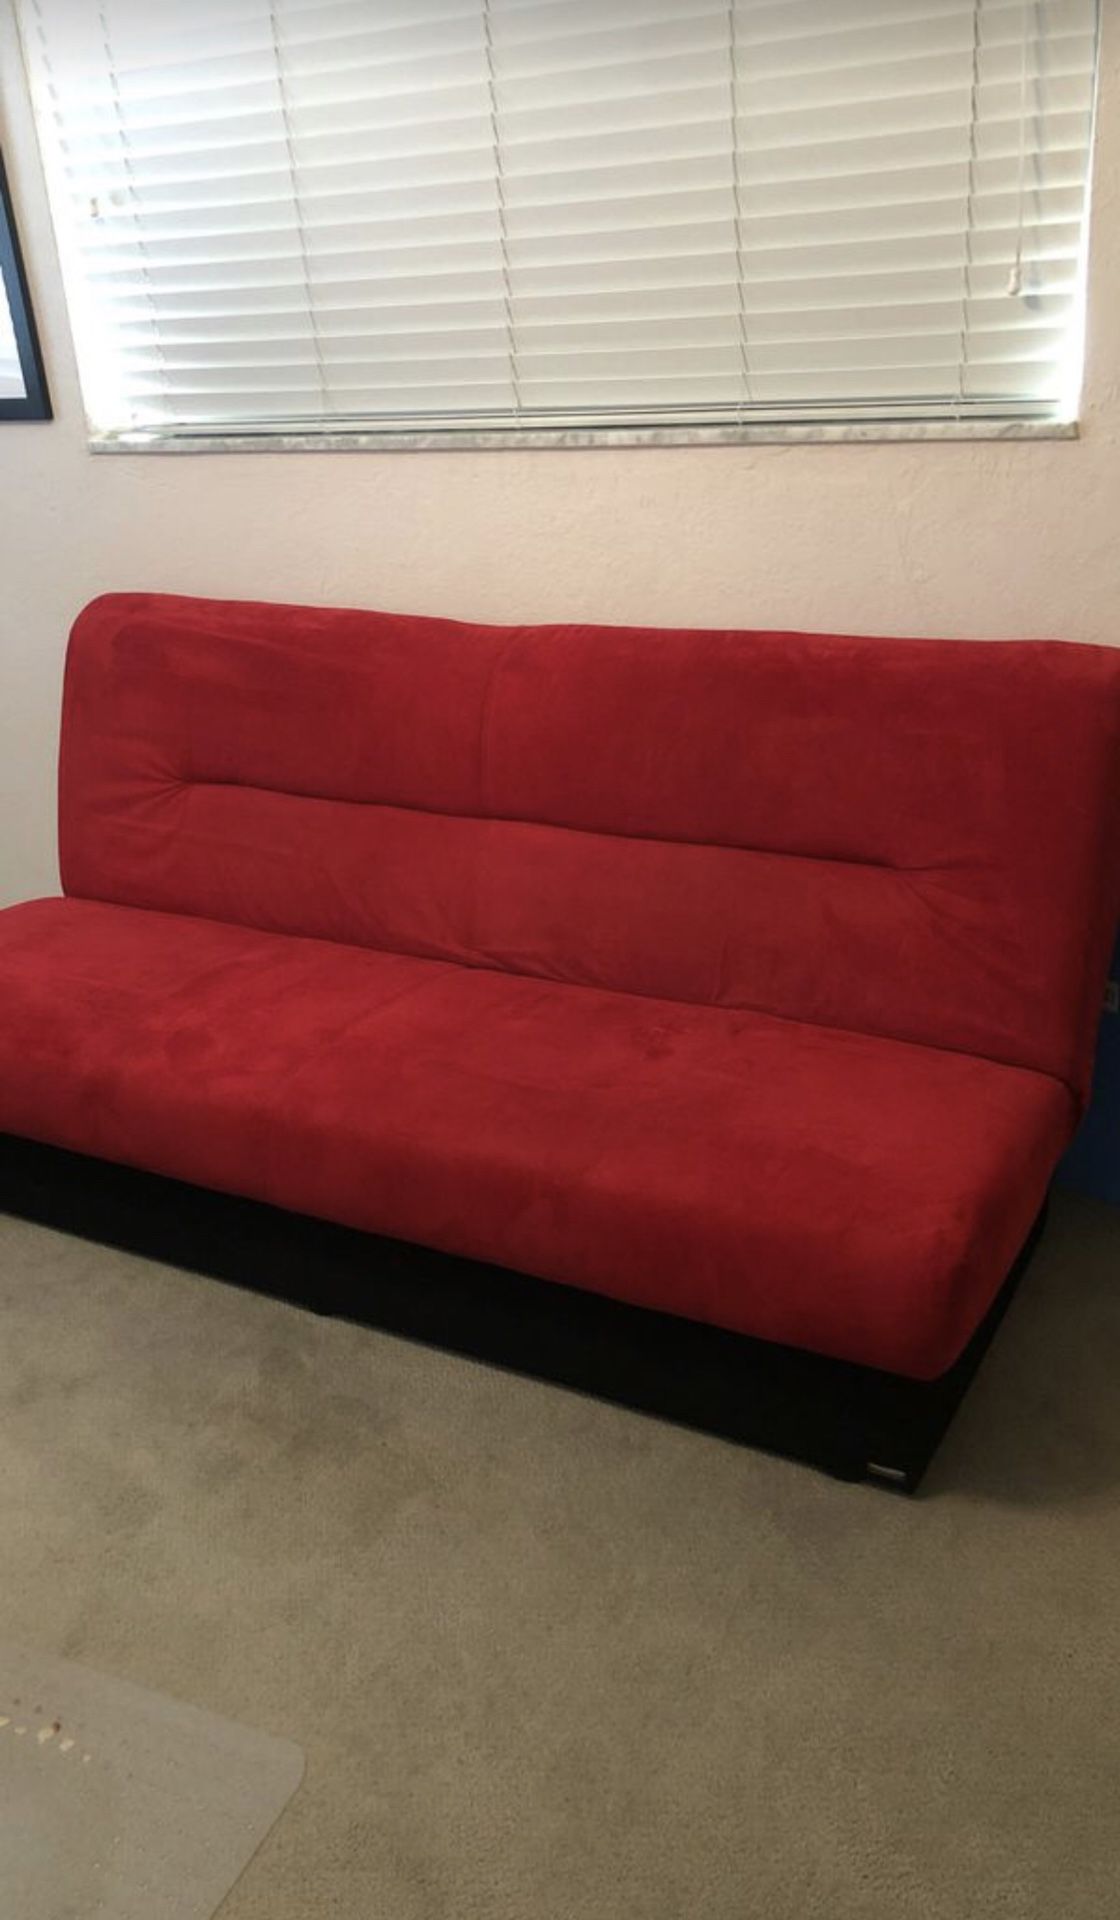 FUTON - must sell ASAP. it's 77"x47" open. Very comfortable. More of a sleeper with storage